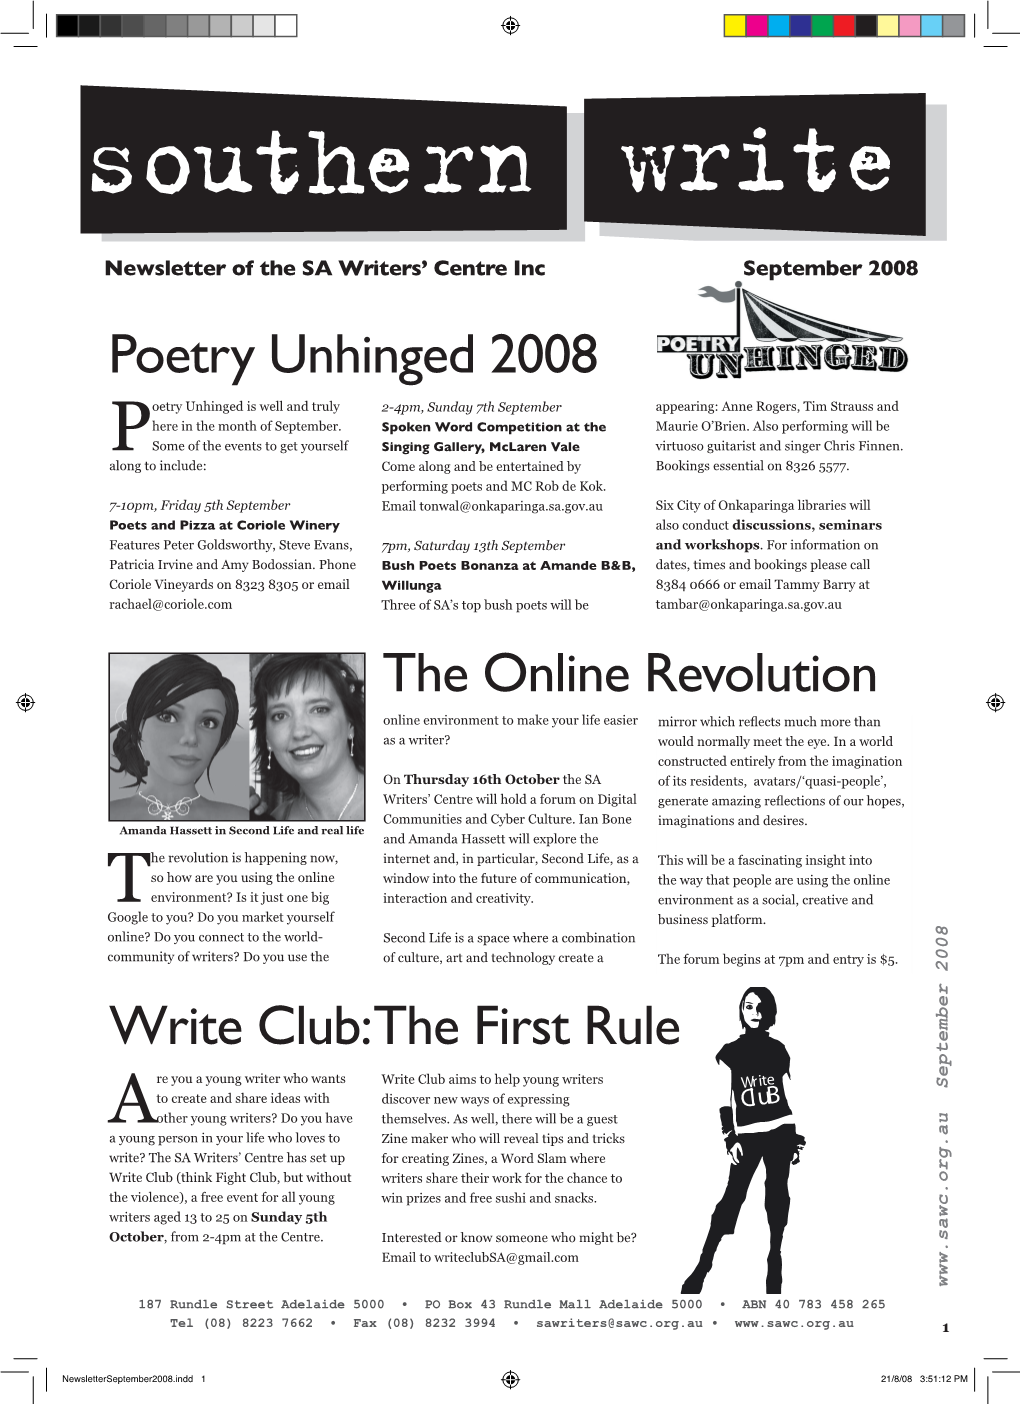 Poetry Unhinged 2008 the Online Revolution Write Club